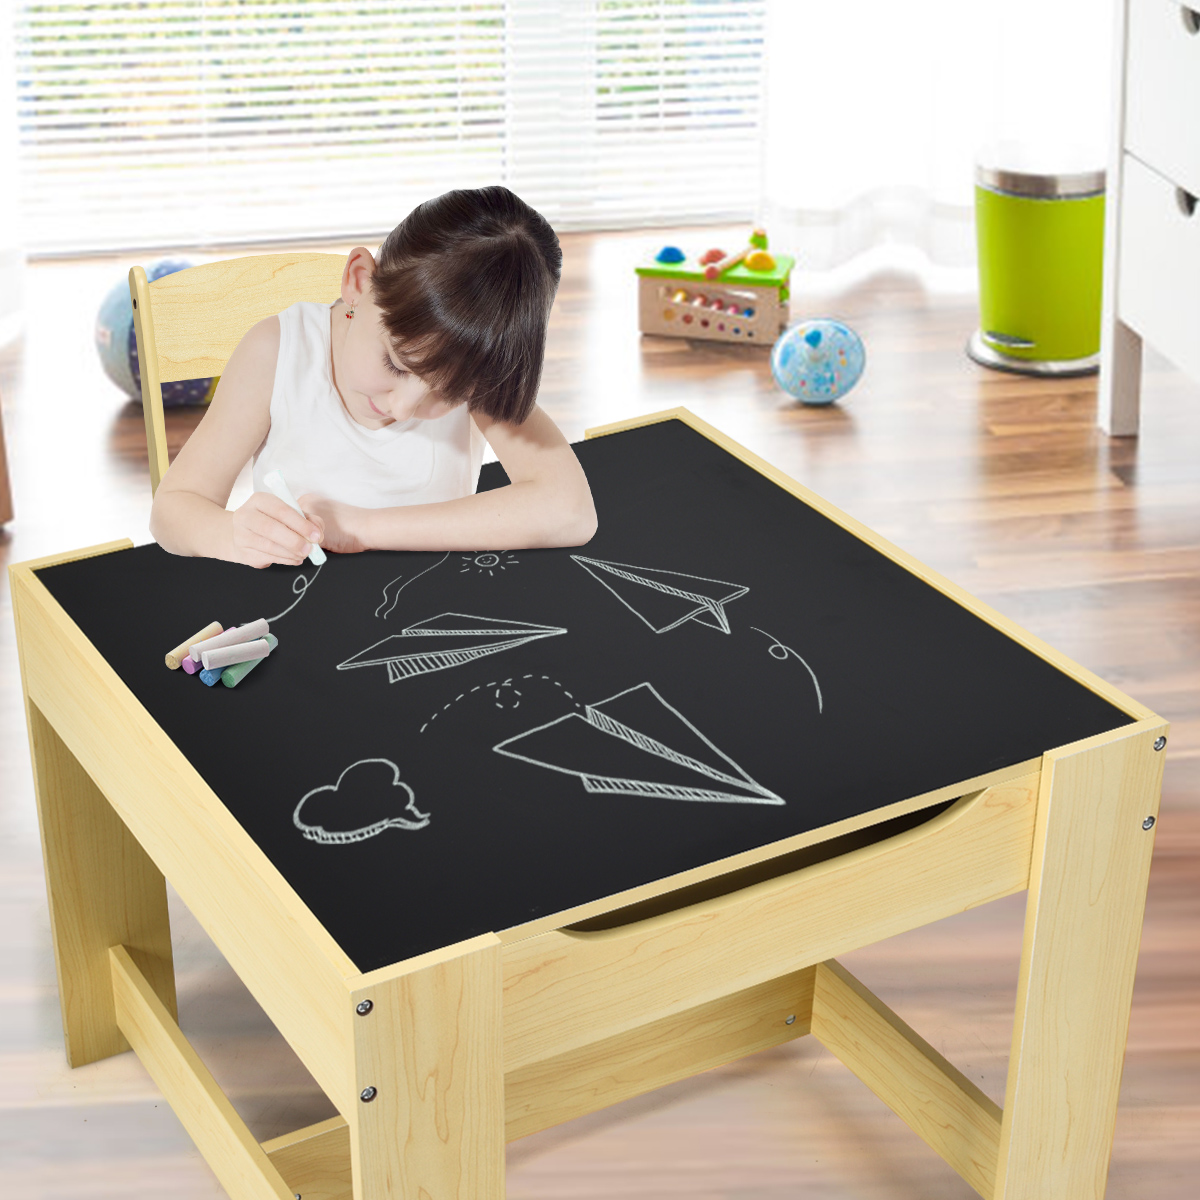 Costway Kids Table Chairs Set With Storage Boxes Blackboard Whiteboard Drawing Nature - image 2 of 10